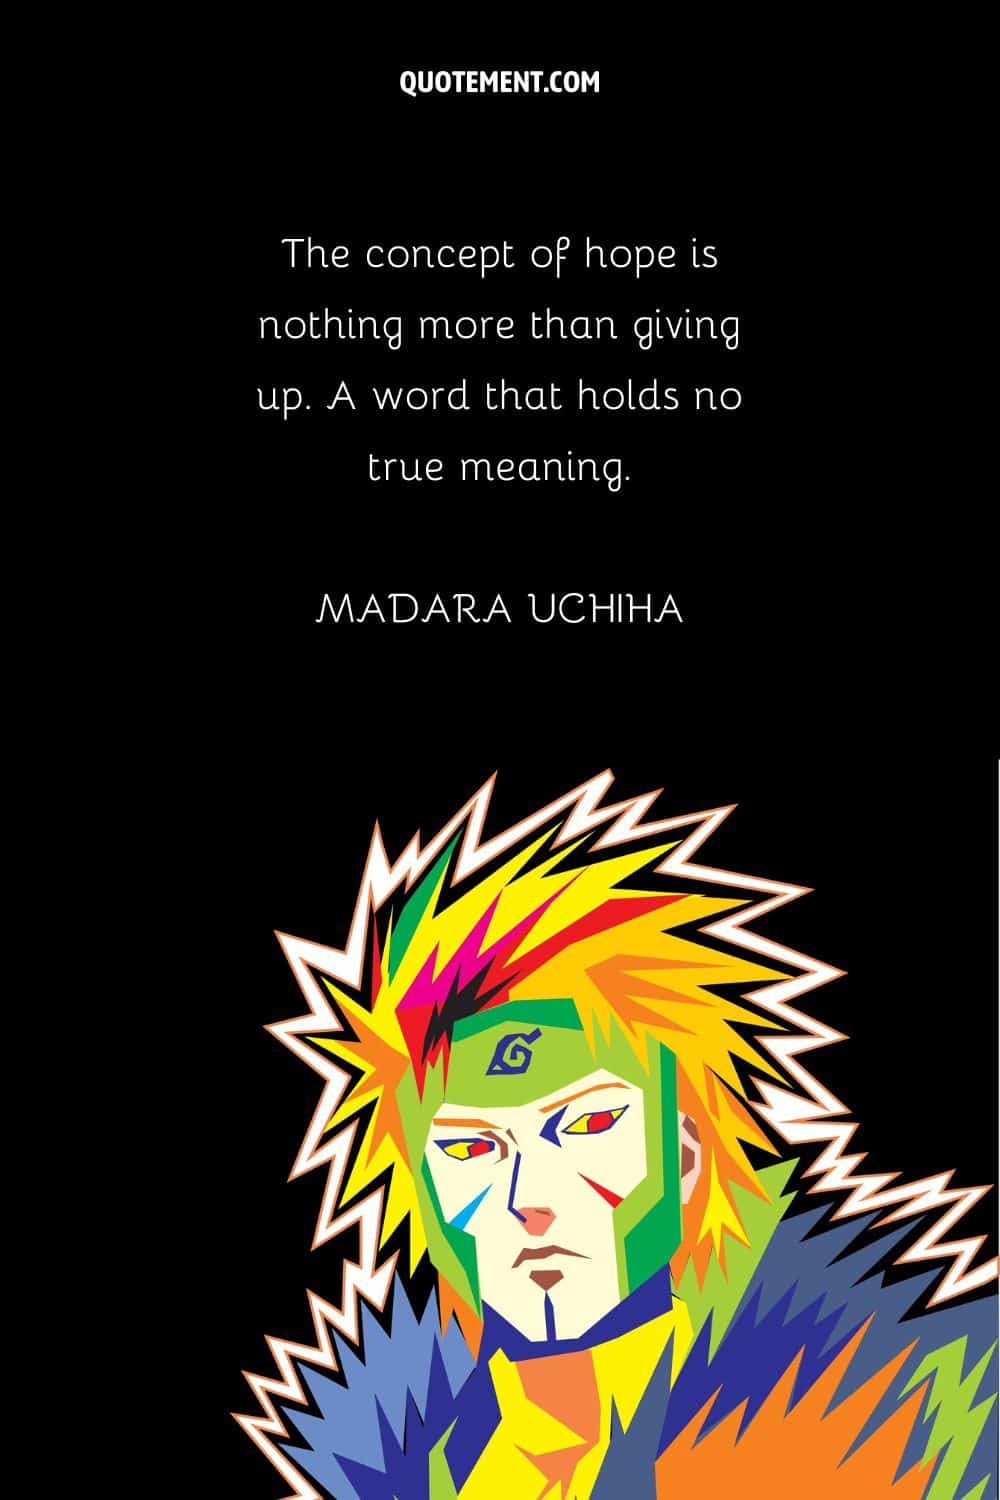 “The concept of hope is nothing more than giving up. A word that holds no true meaning.” — Madara Uchiha